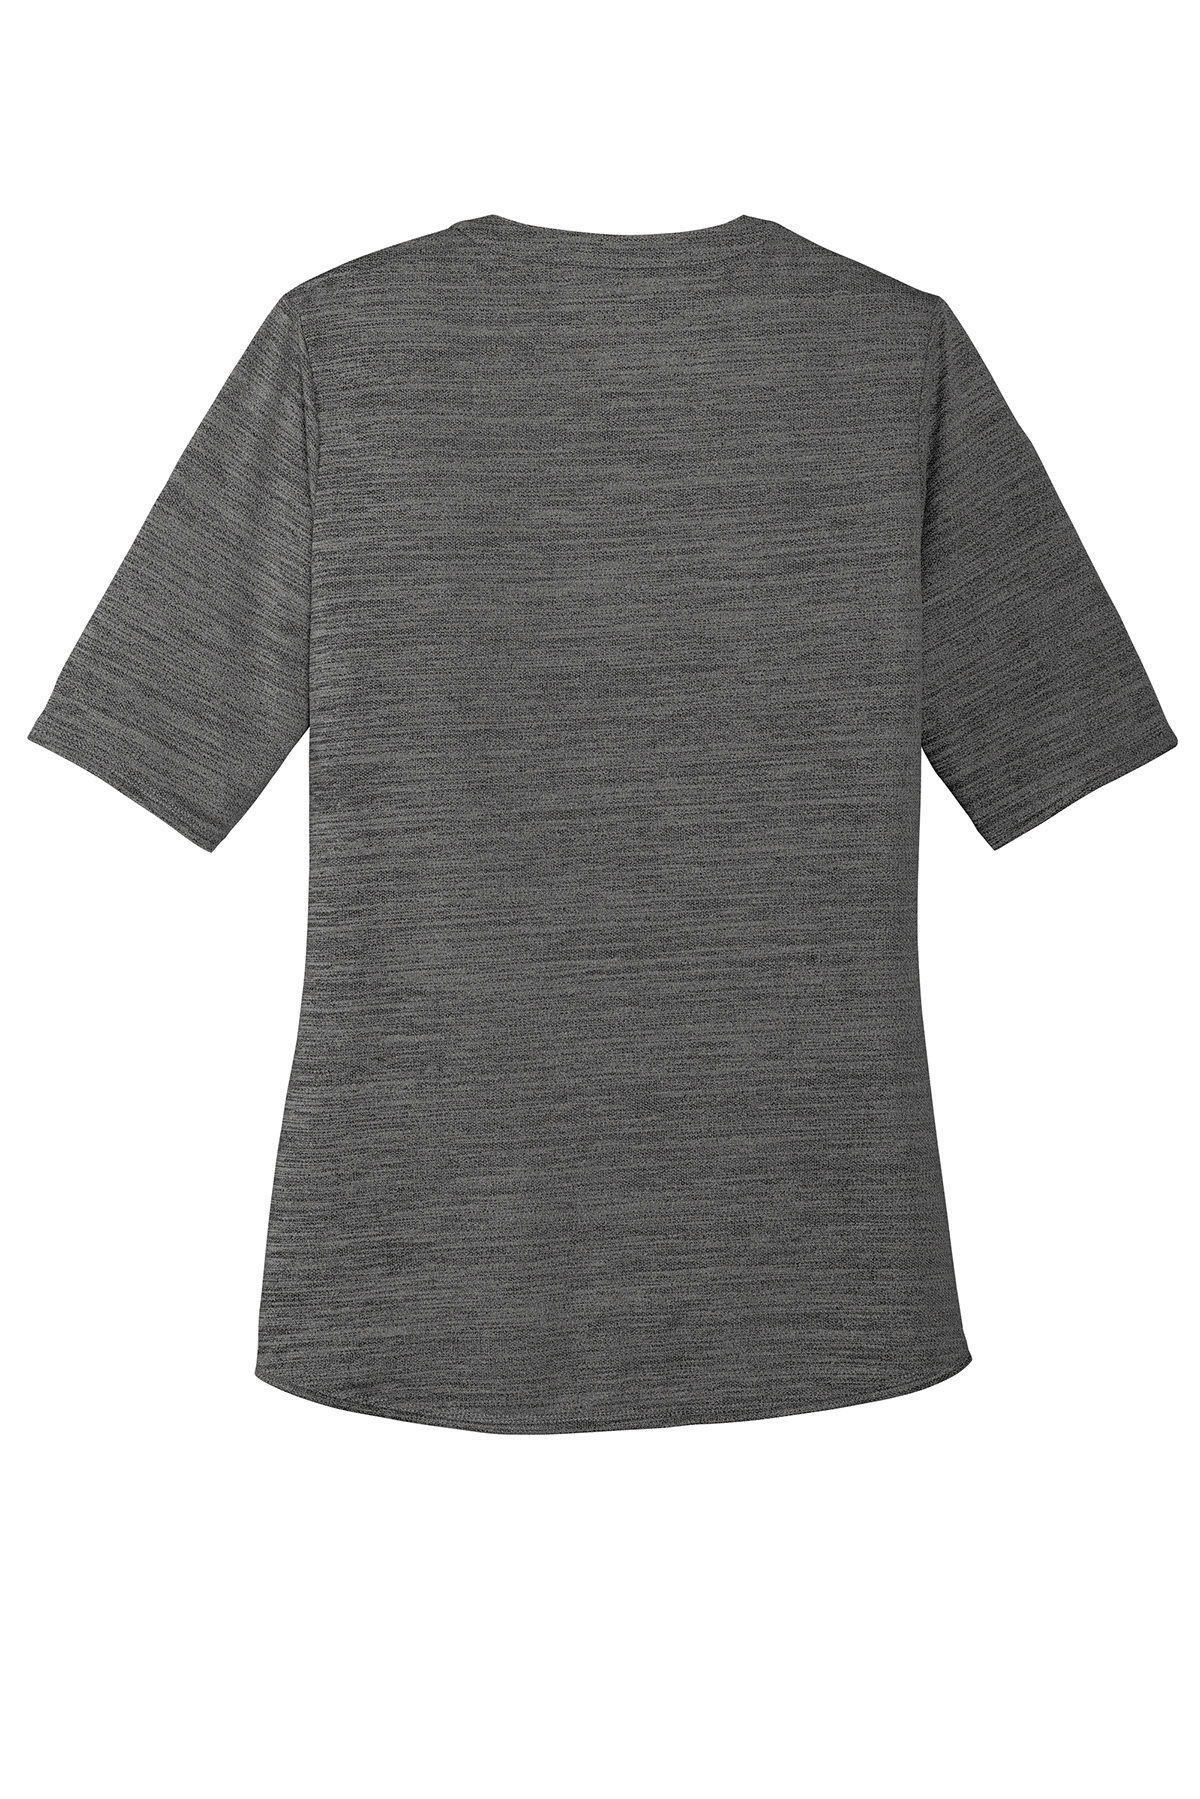 Port Authority Ladies Stretch Heather Open Neck Top | Product | Company ...